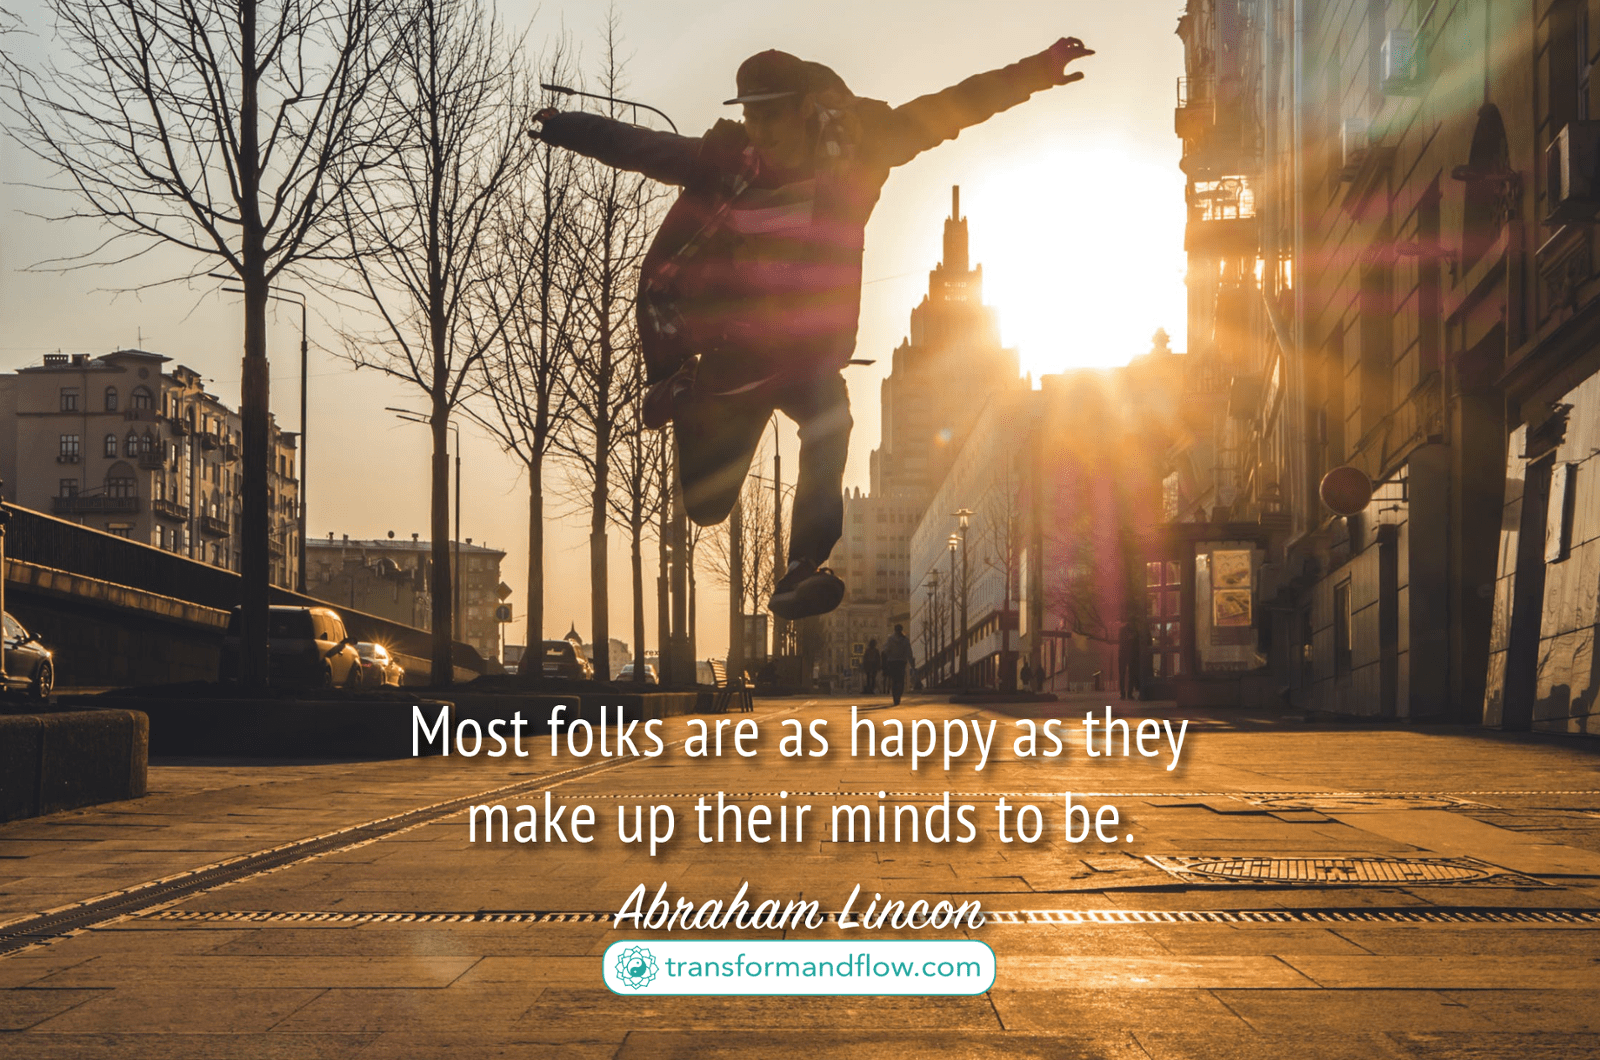 "Most folks are as happy as they make up their minds to be" - Abraham Lincon